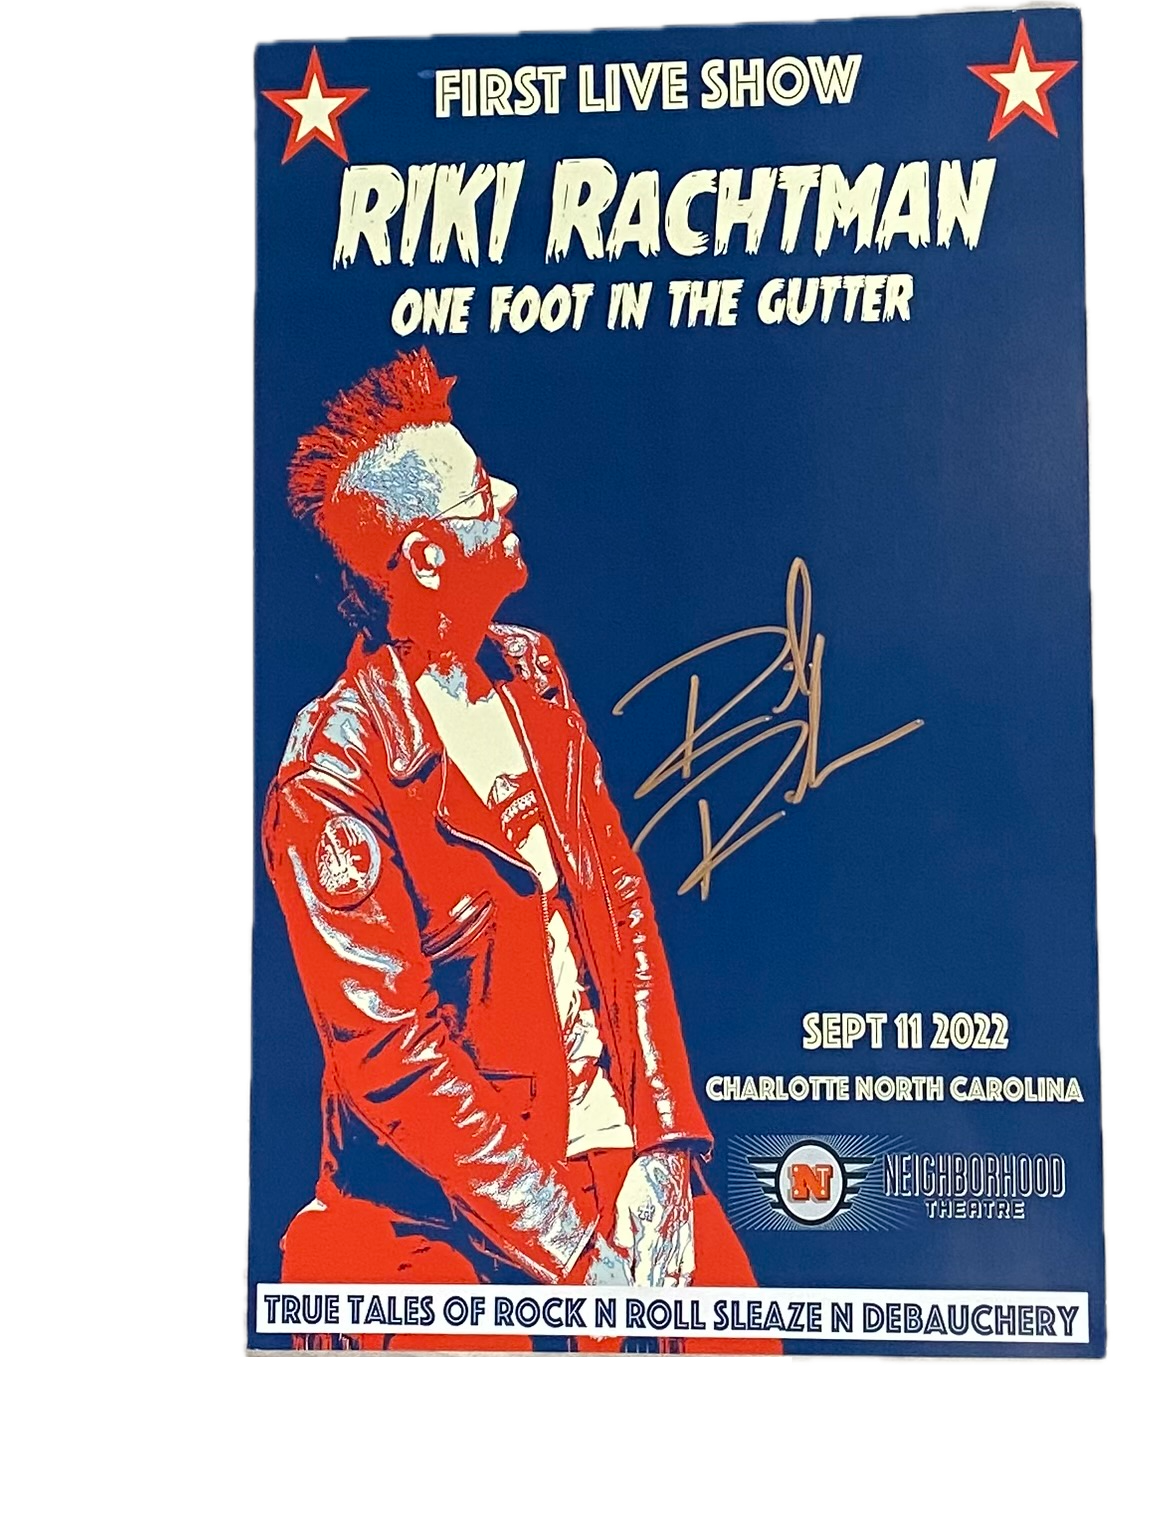 Signed Riki Rachtman poster from 1st O.F.I.T.G show (only 40 left)